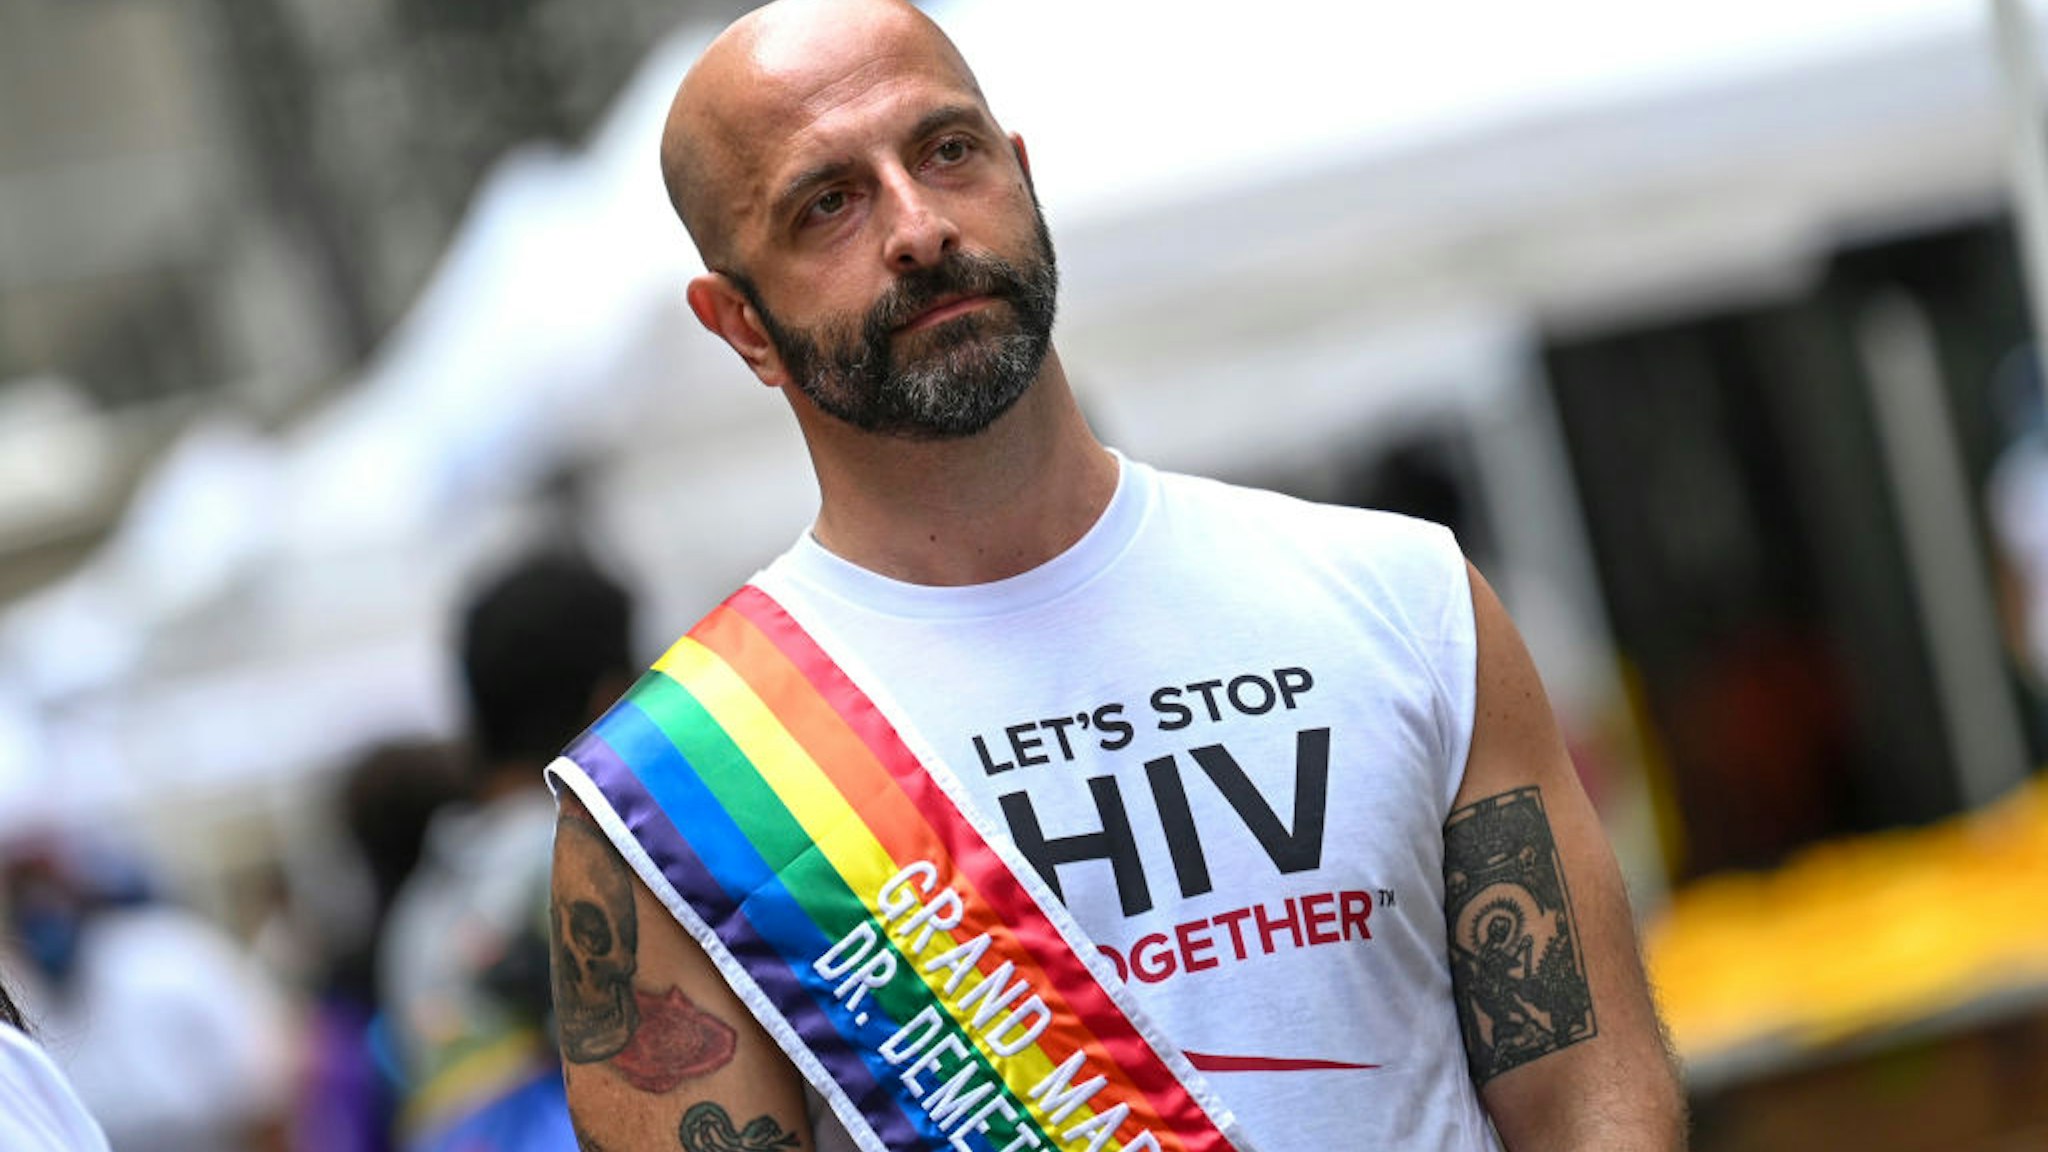 NEW YORK, NEW YORK - JUNE 27: Grand Marsal Dr. Demetre Daskalakis waits to speak to press at the 2021 NYC Pride March near the Flatiron District on June 27, 2021 in New York City. The NYC Pride March was held virtually in 2020 due to the coronavirus pandemic. This year's theme is 'The Fight Continues.’ (Photo by Alexi Rosenfeld/Getty Images)